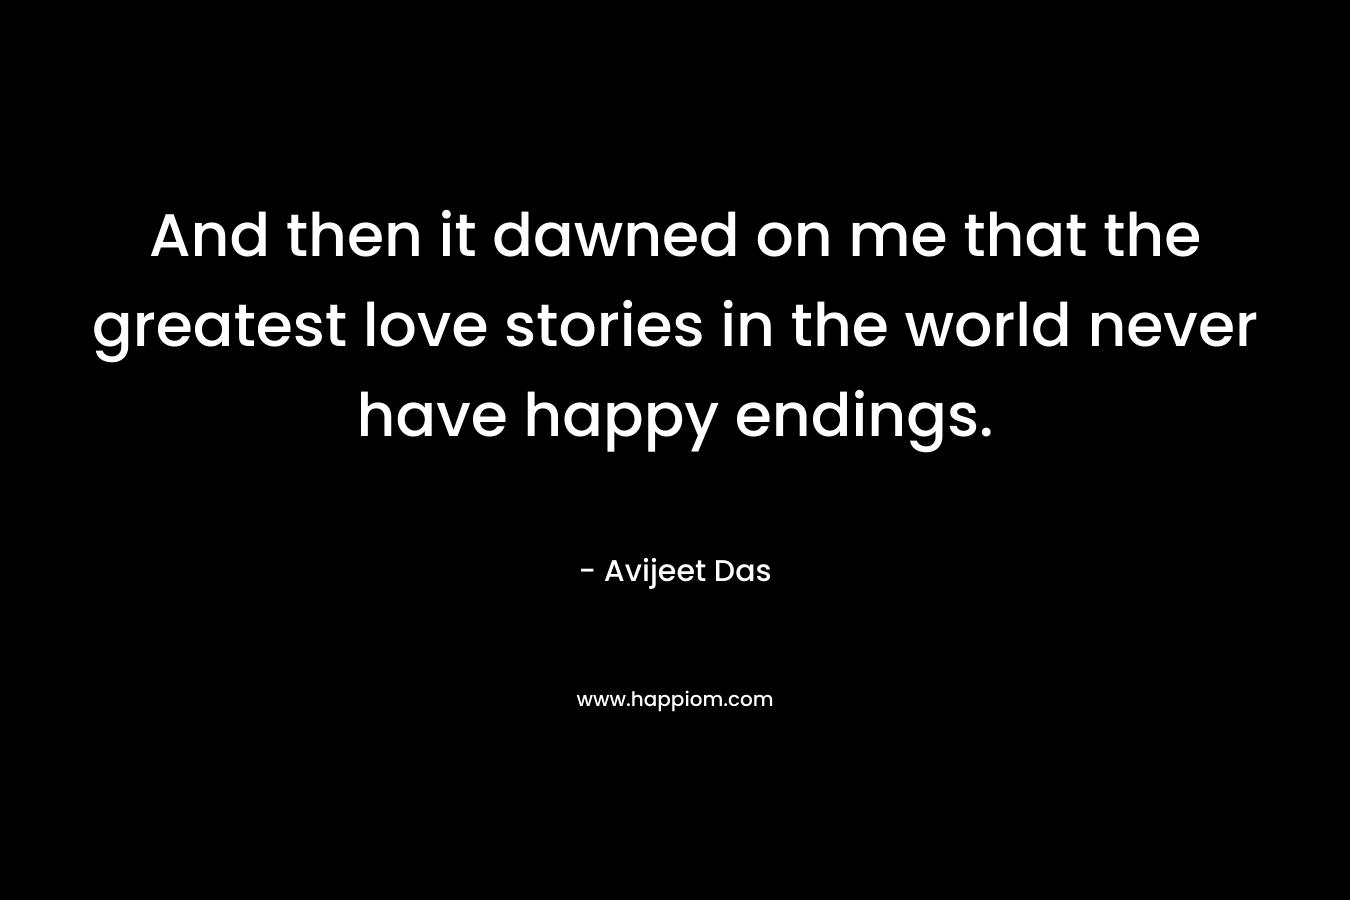 And then it dawned on me that the greatest love stories in the world never have happy endings.